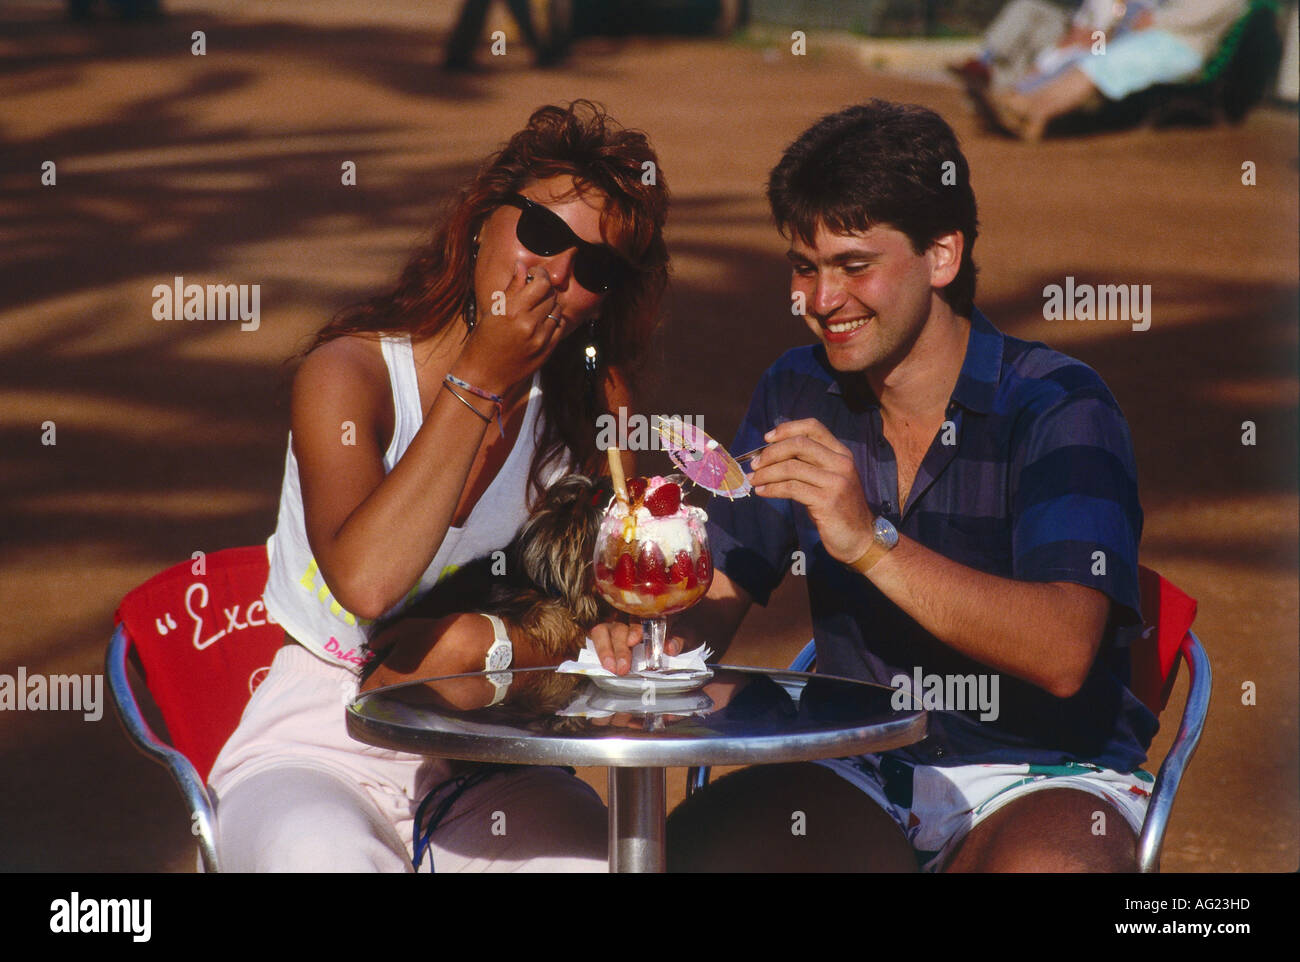 people, food and beverages, young couple eating ice cream, 1980s, sunglasses, sidewalk cafe, Stock Photo